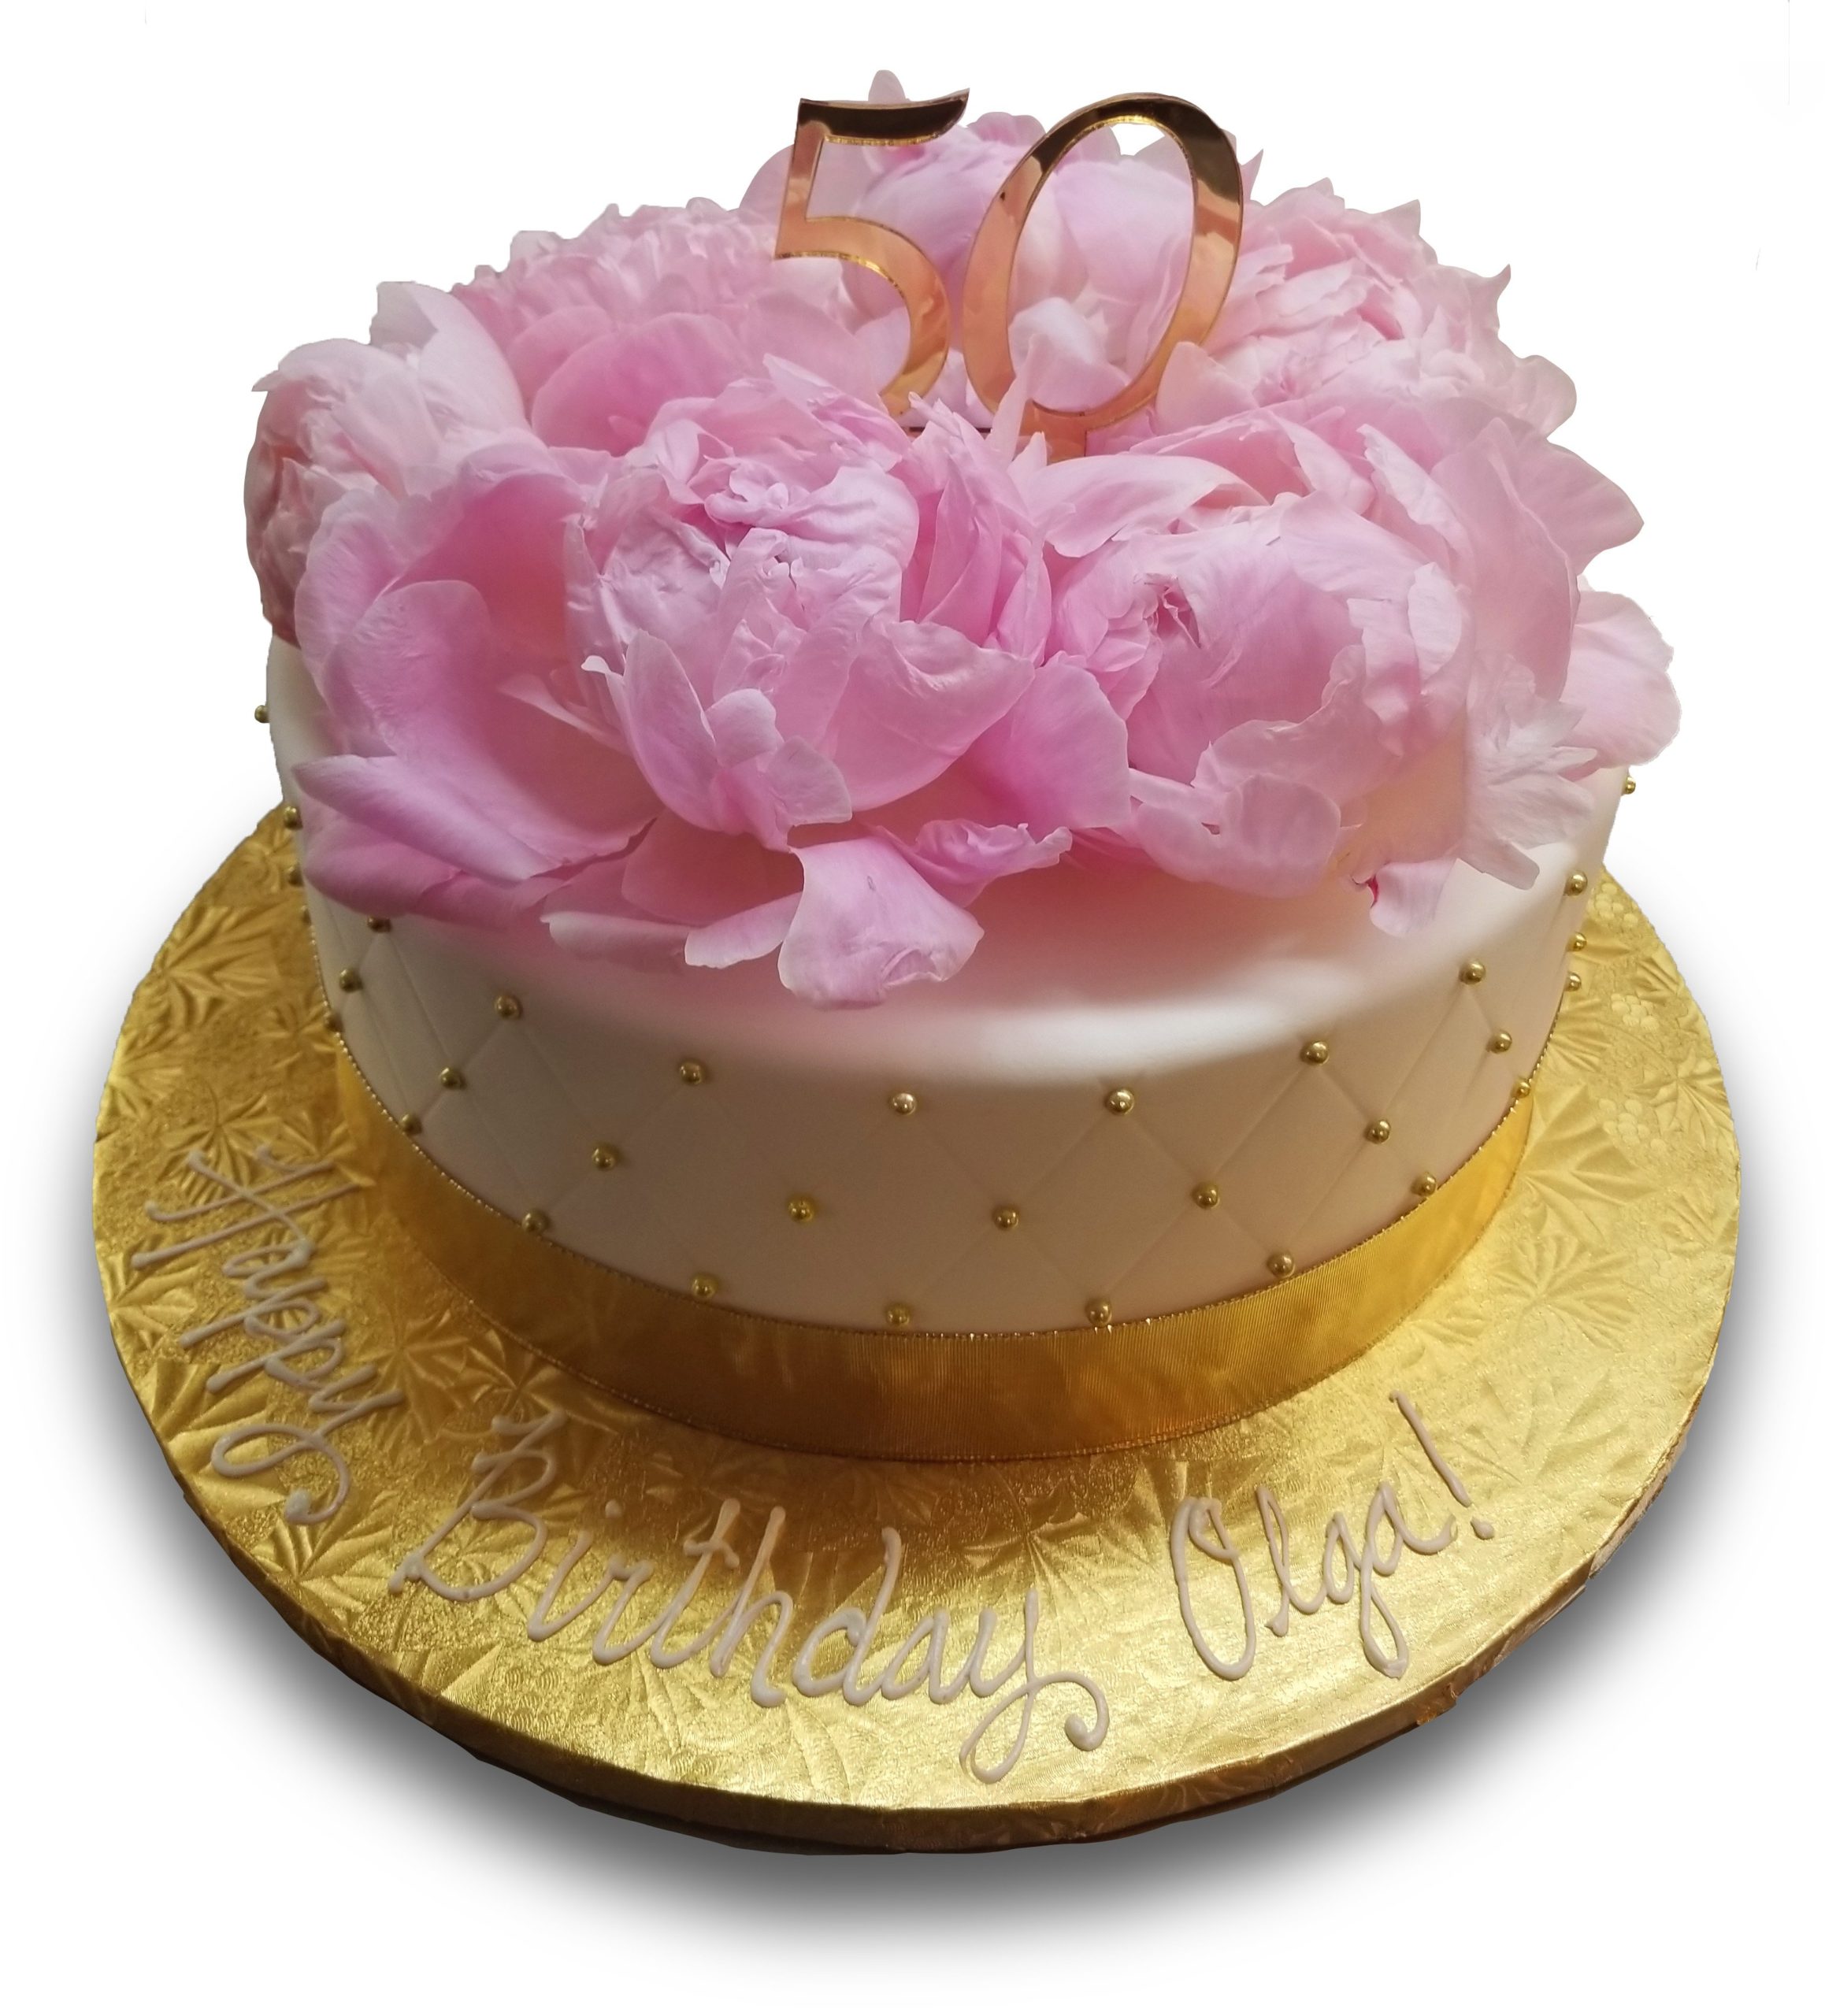 AB013. Quilted fondant cake with pink silk peonies and gold 50 topper